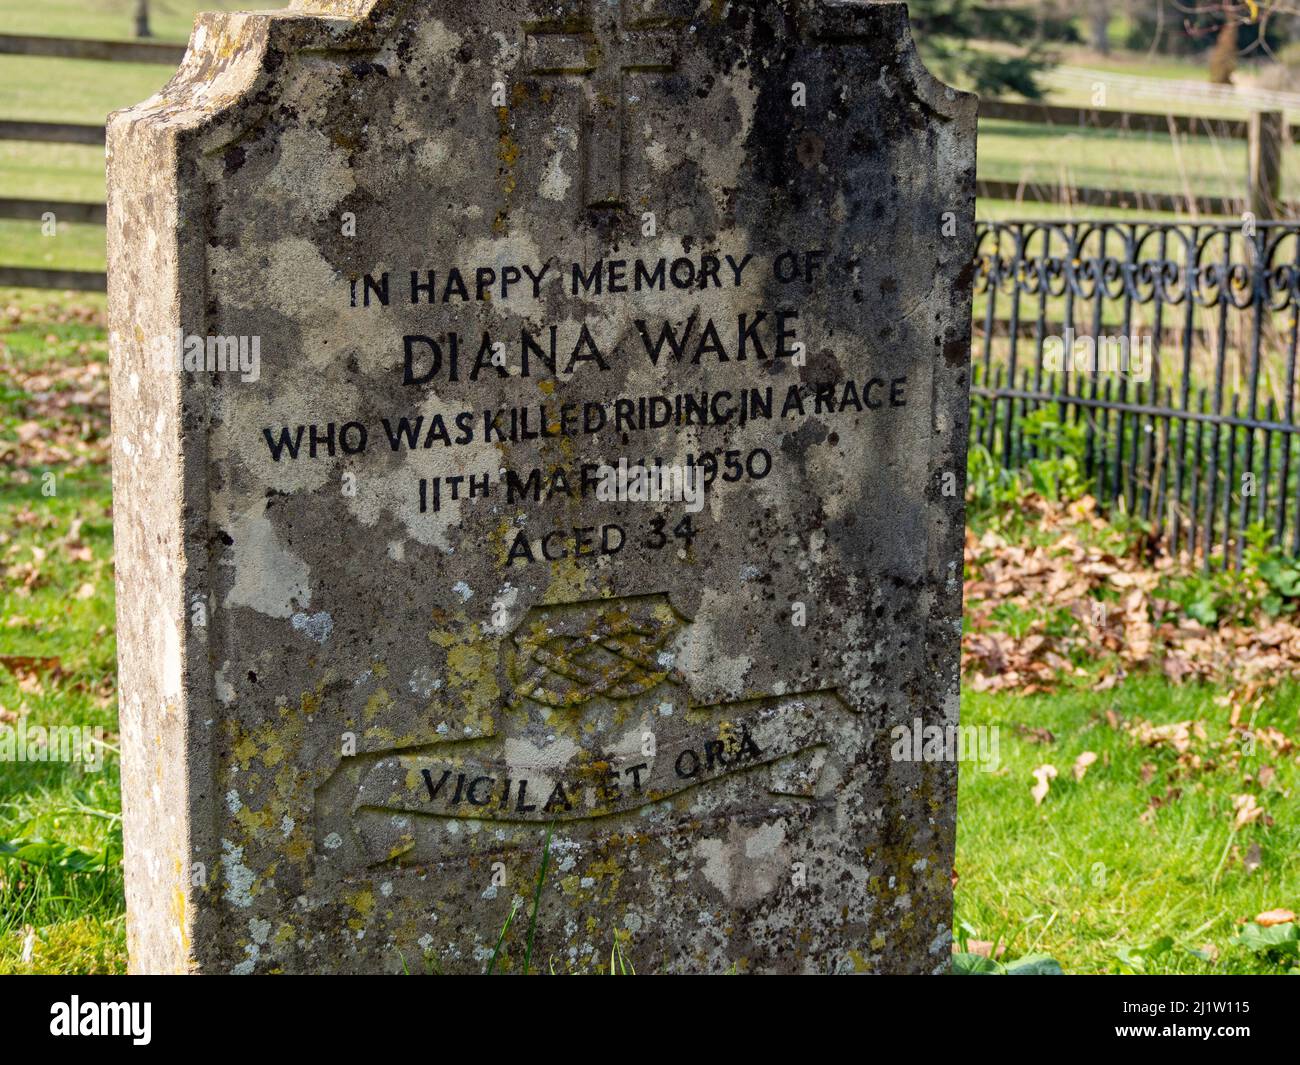 Headstone to Diana Wake, killed riding in a race, the church of St Peter and St Paul, Courteenhall, Northamptonshire, UK Stock Photo